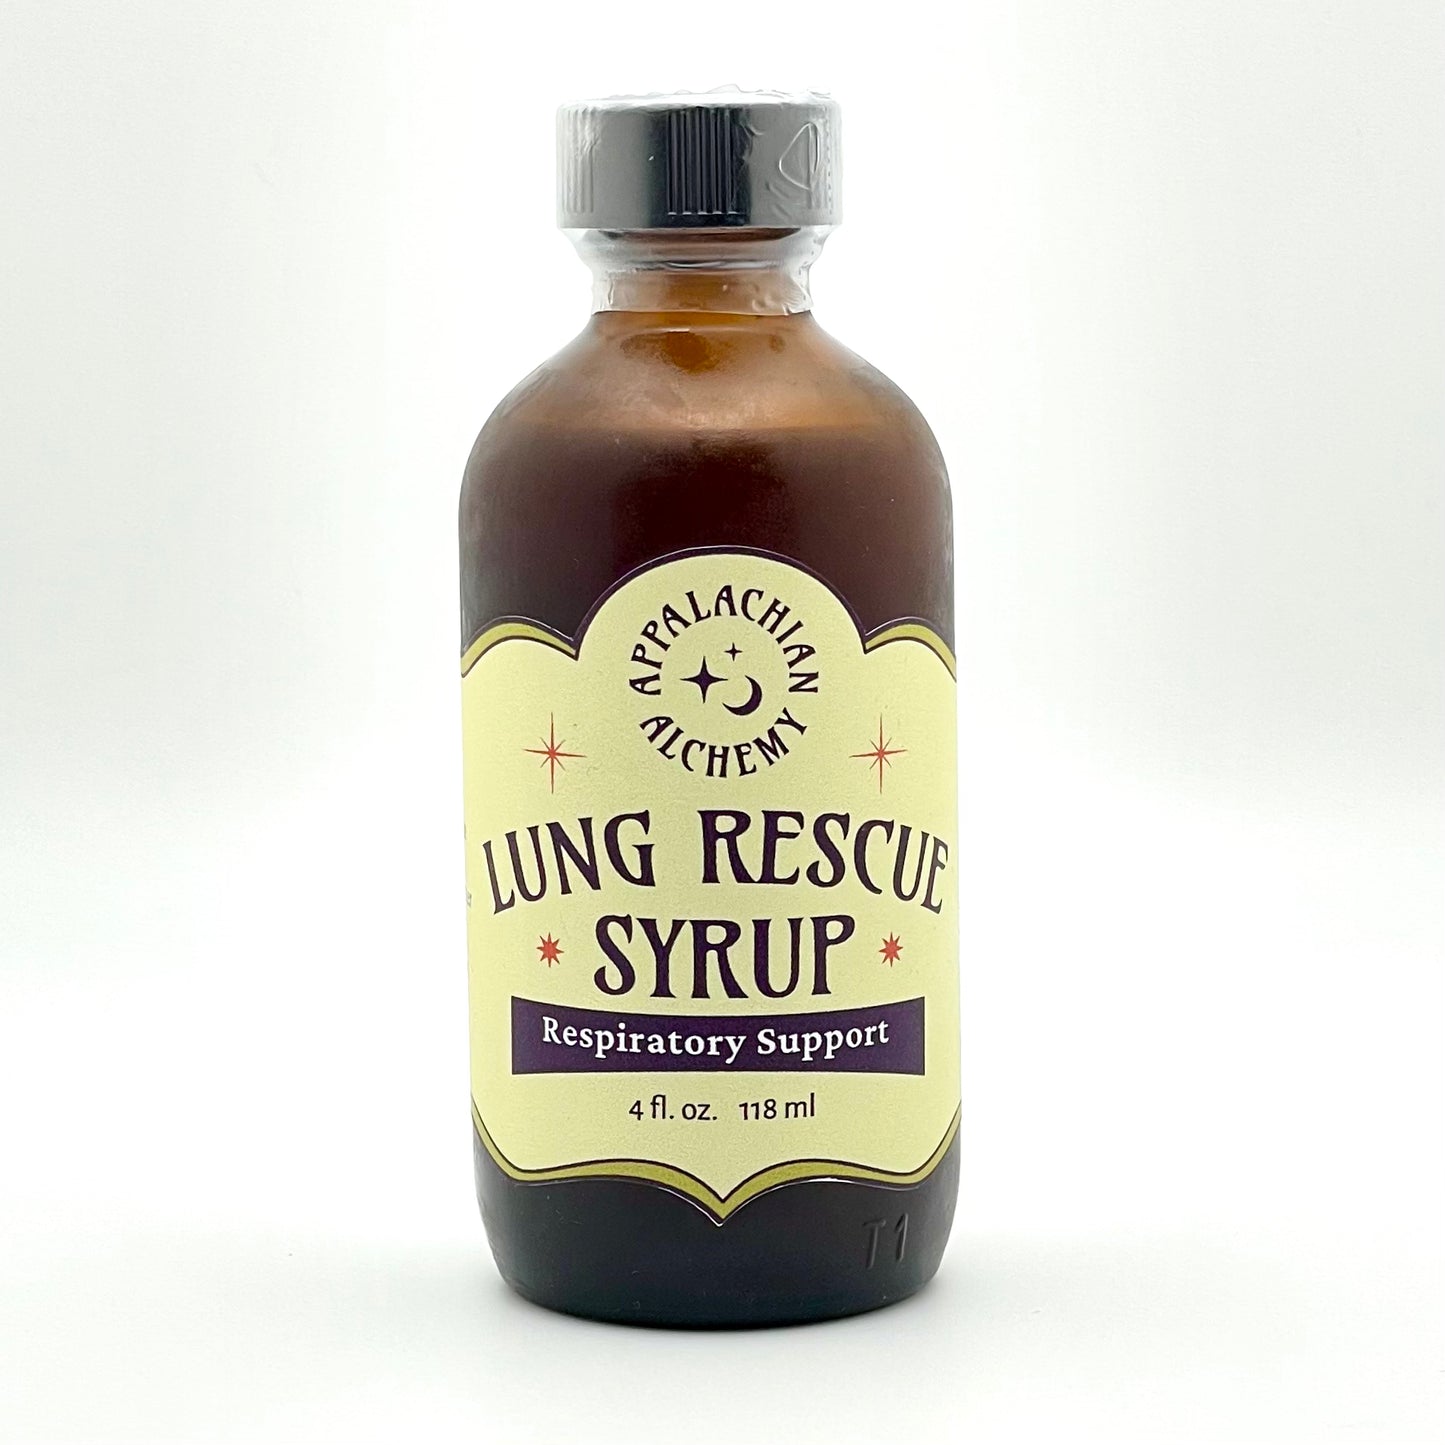 Lung Rescue Syrup